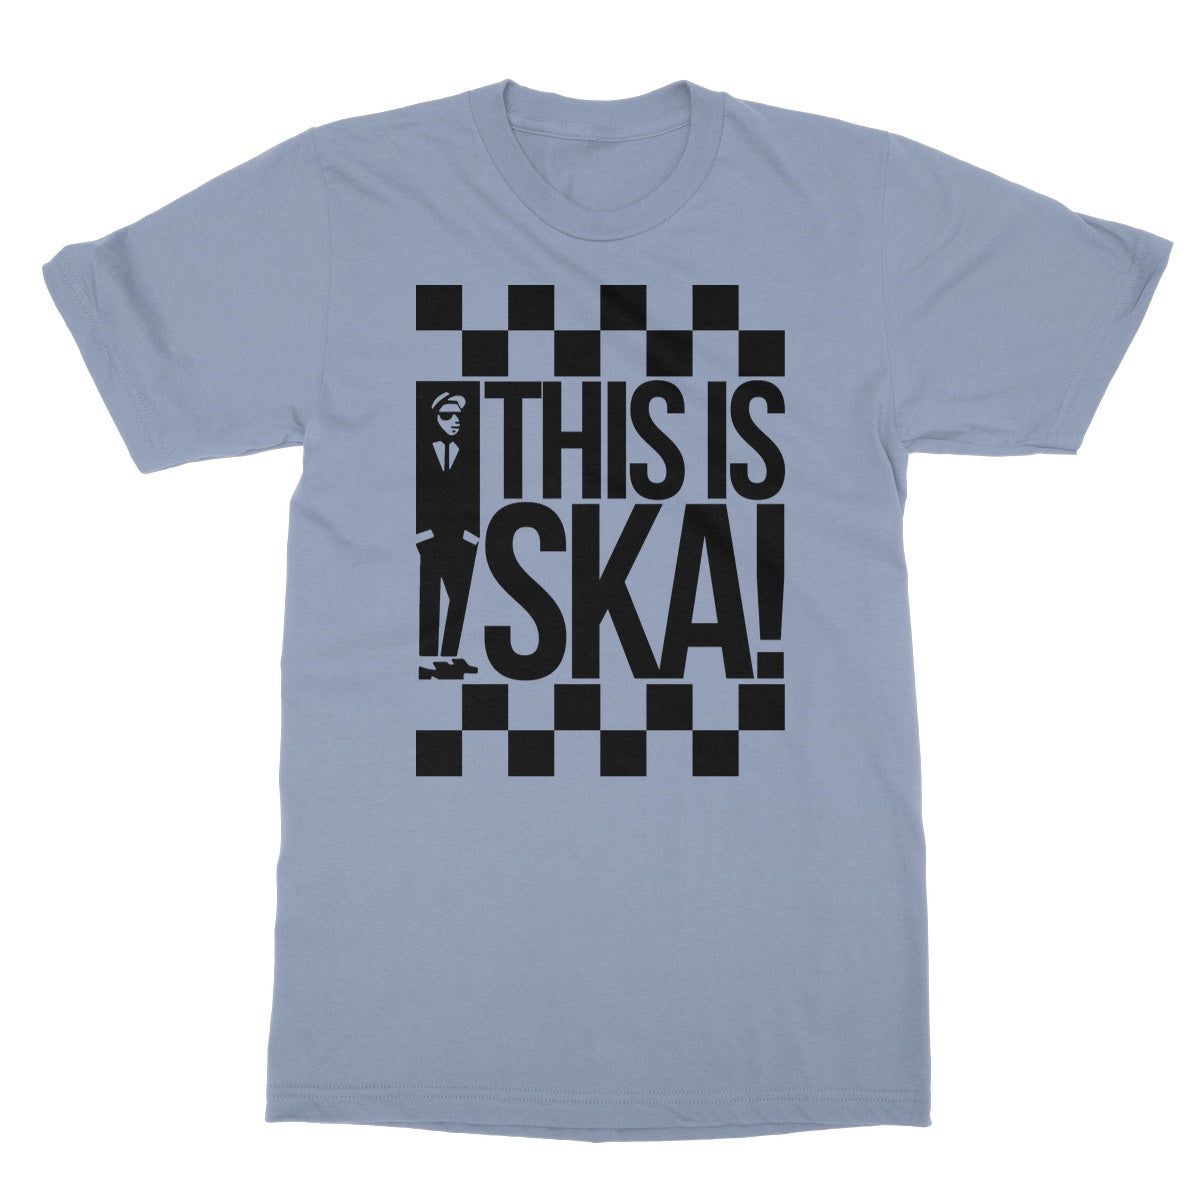 This Is Ska Softstyle T-Shirt